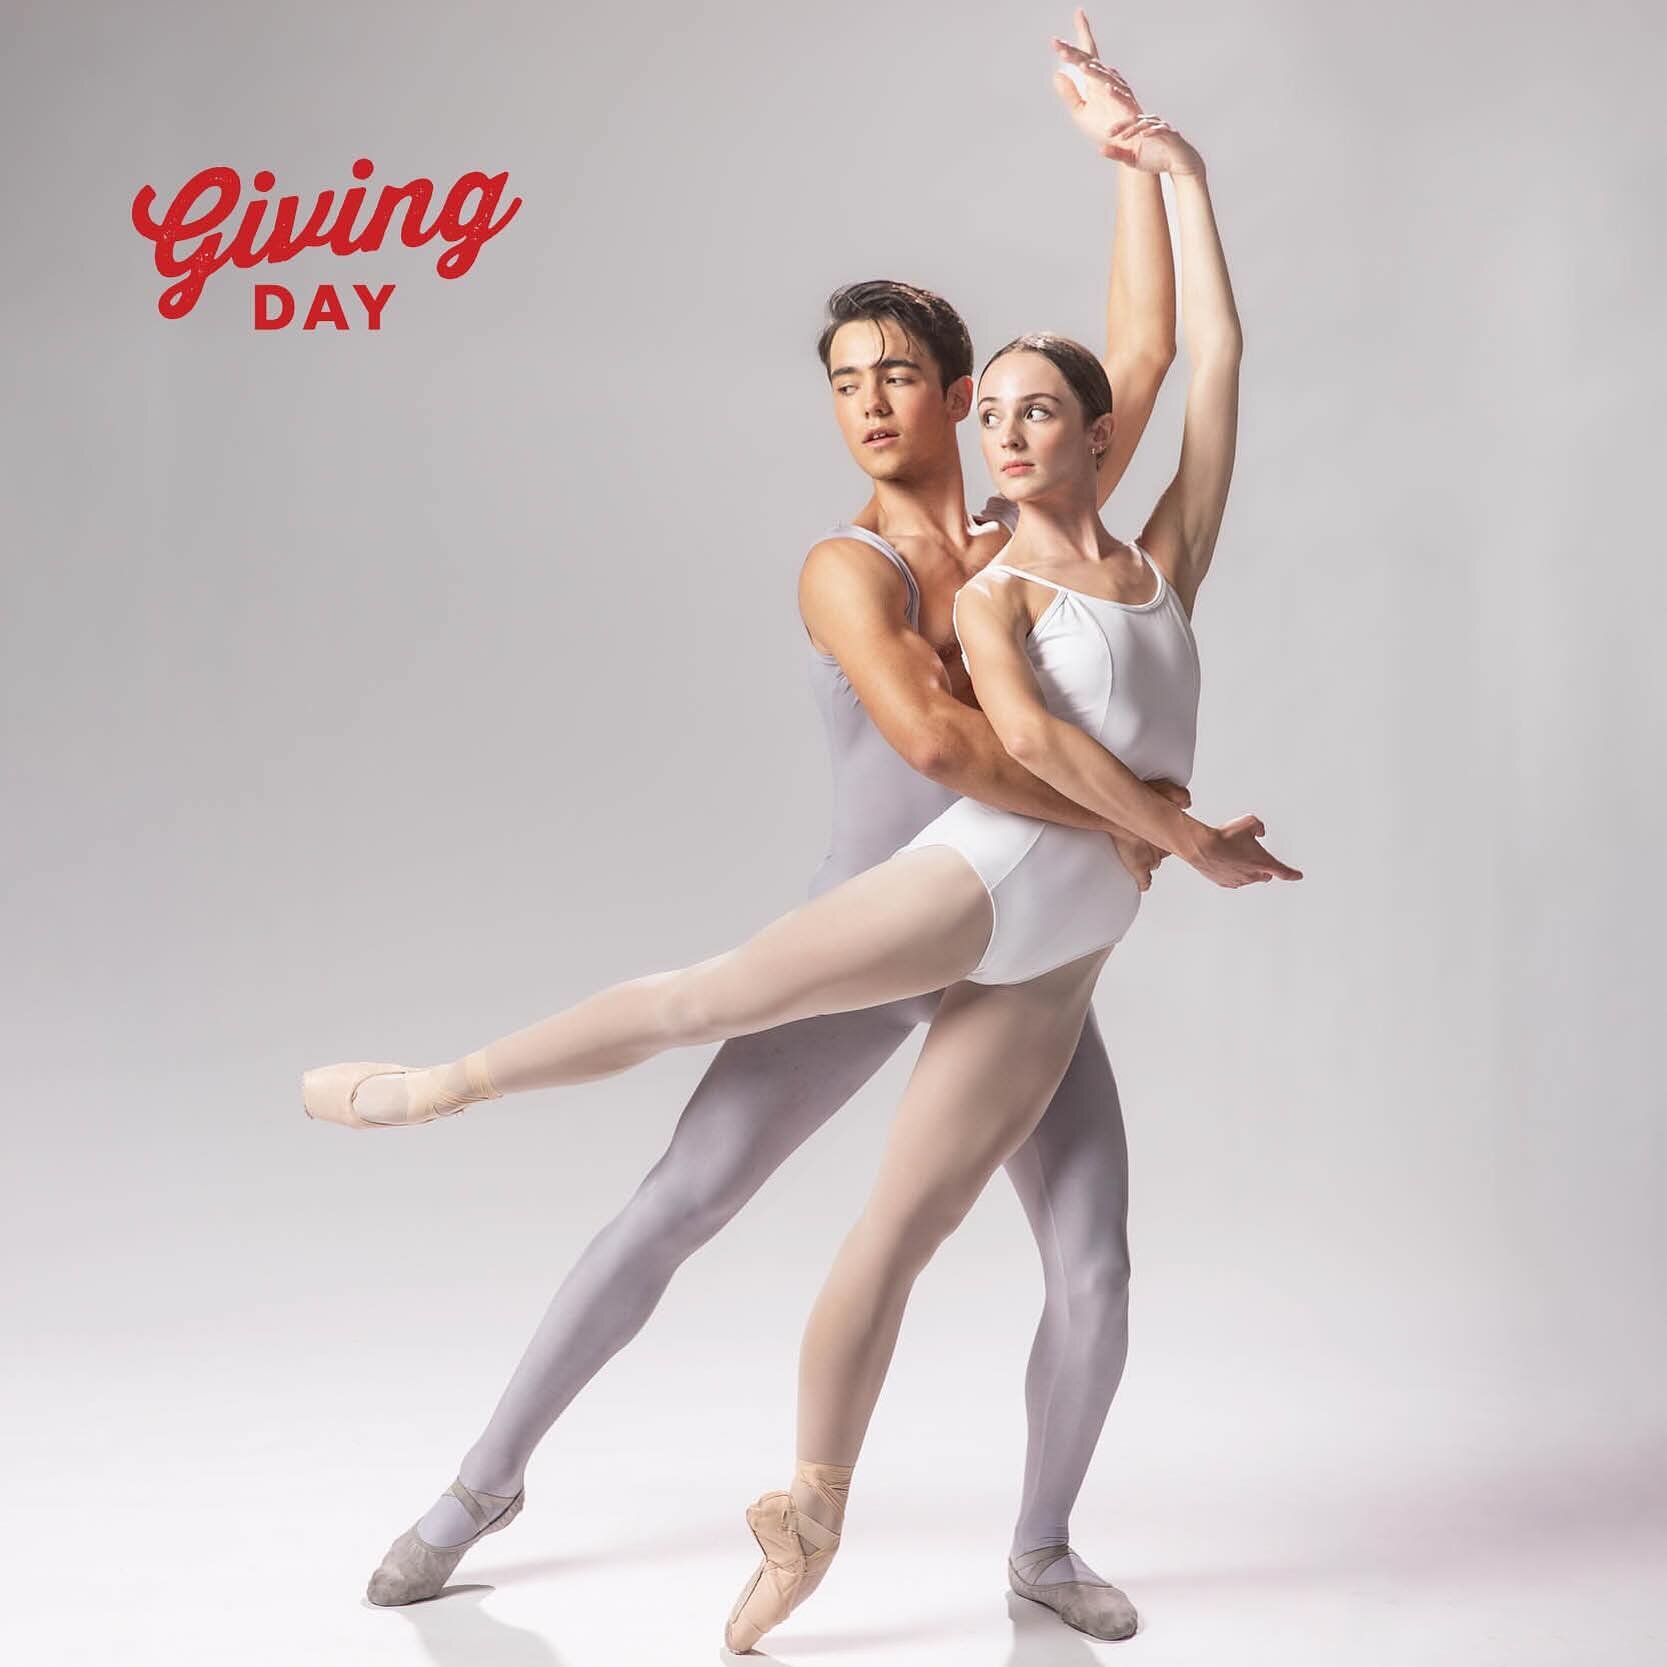 Can you help us get to 50 today?&nbsp;
&nbsp;
So far this #UGivingDay, you&rsquo;ve helped us raise $11,500+ for scholarships in the arts. We have until 3p today to reach 50 alumni donors giving any amount to unlock an additional $1,500 gift.&nbsp;

